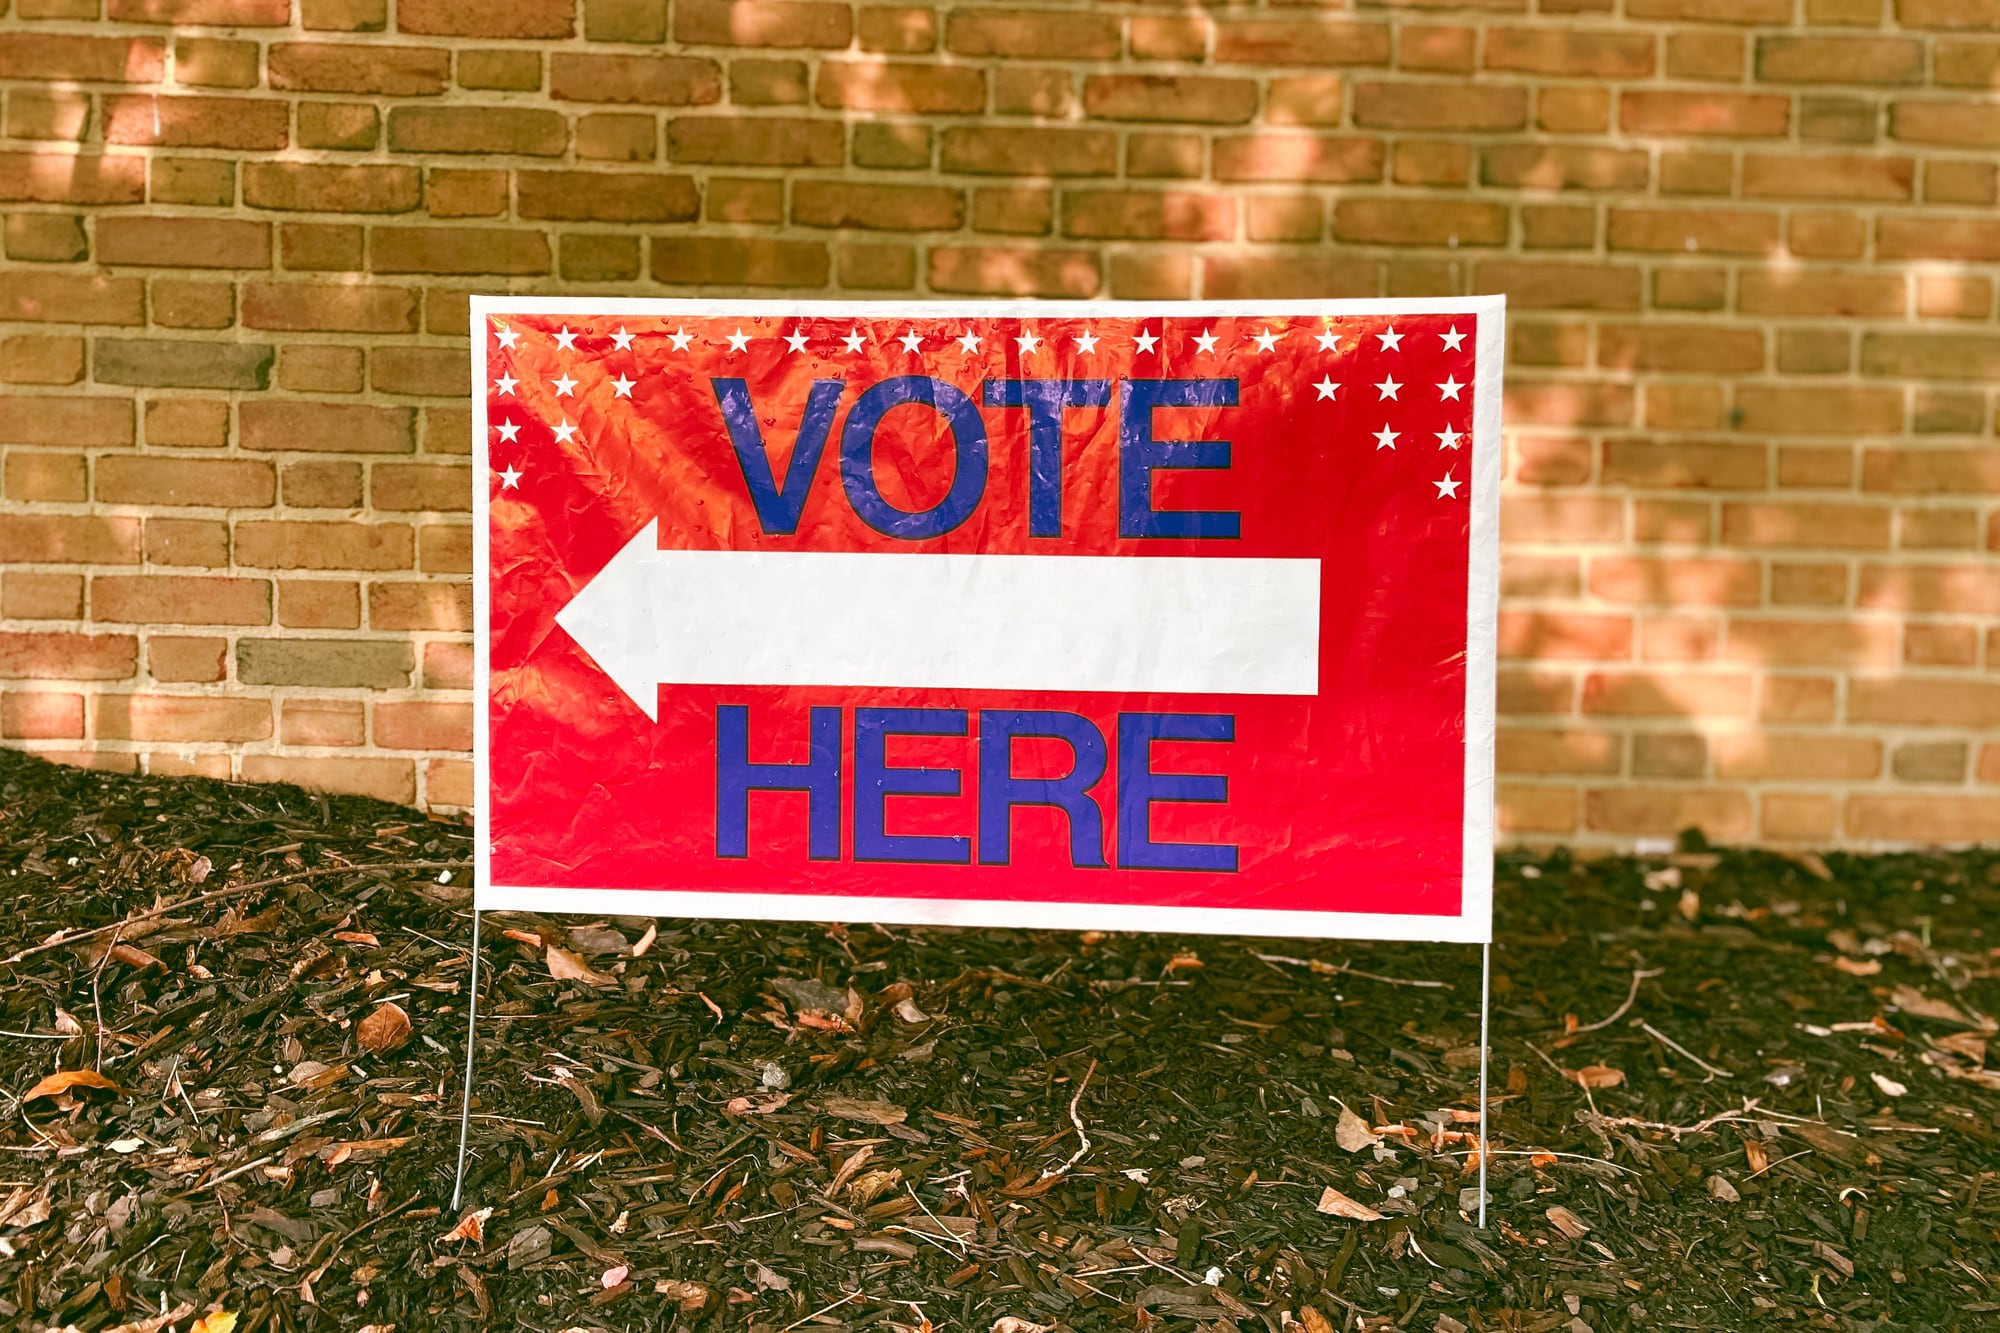 A red sign reads "Vote Here" with a tan brick wall in the background.